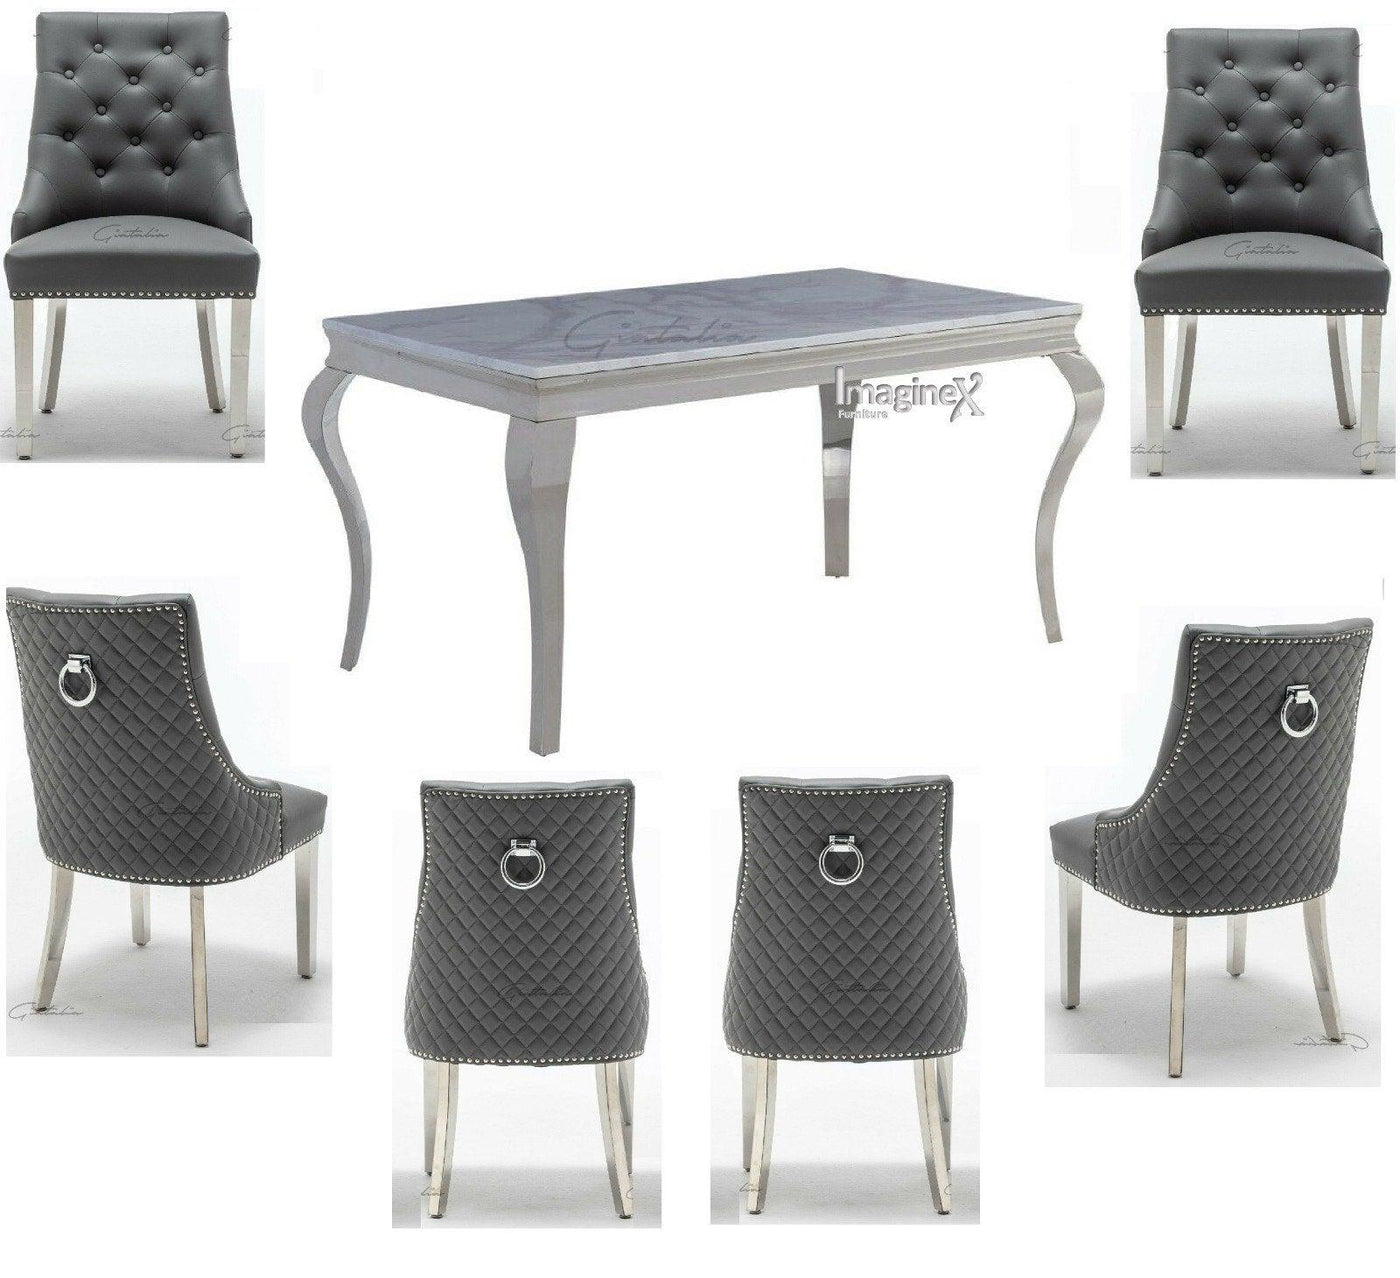 Louis 150cm Grey Marble Dining Table + Grey Chrome Ring Knocker Faux Leather Chairs-Esme Furnishings